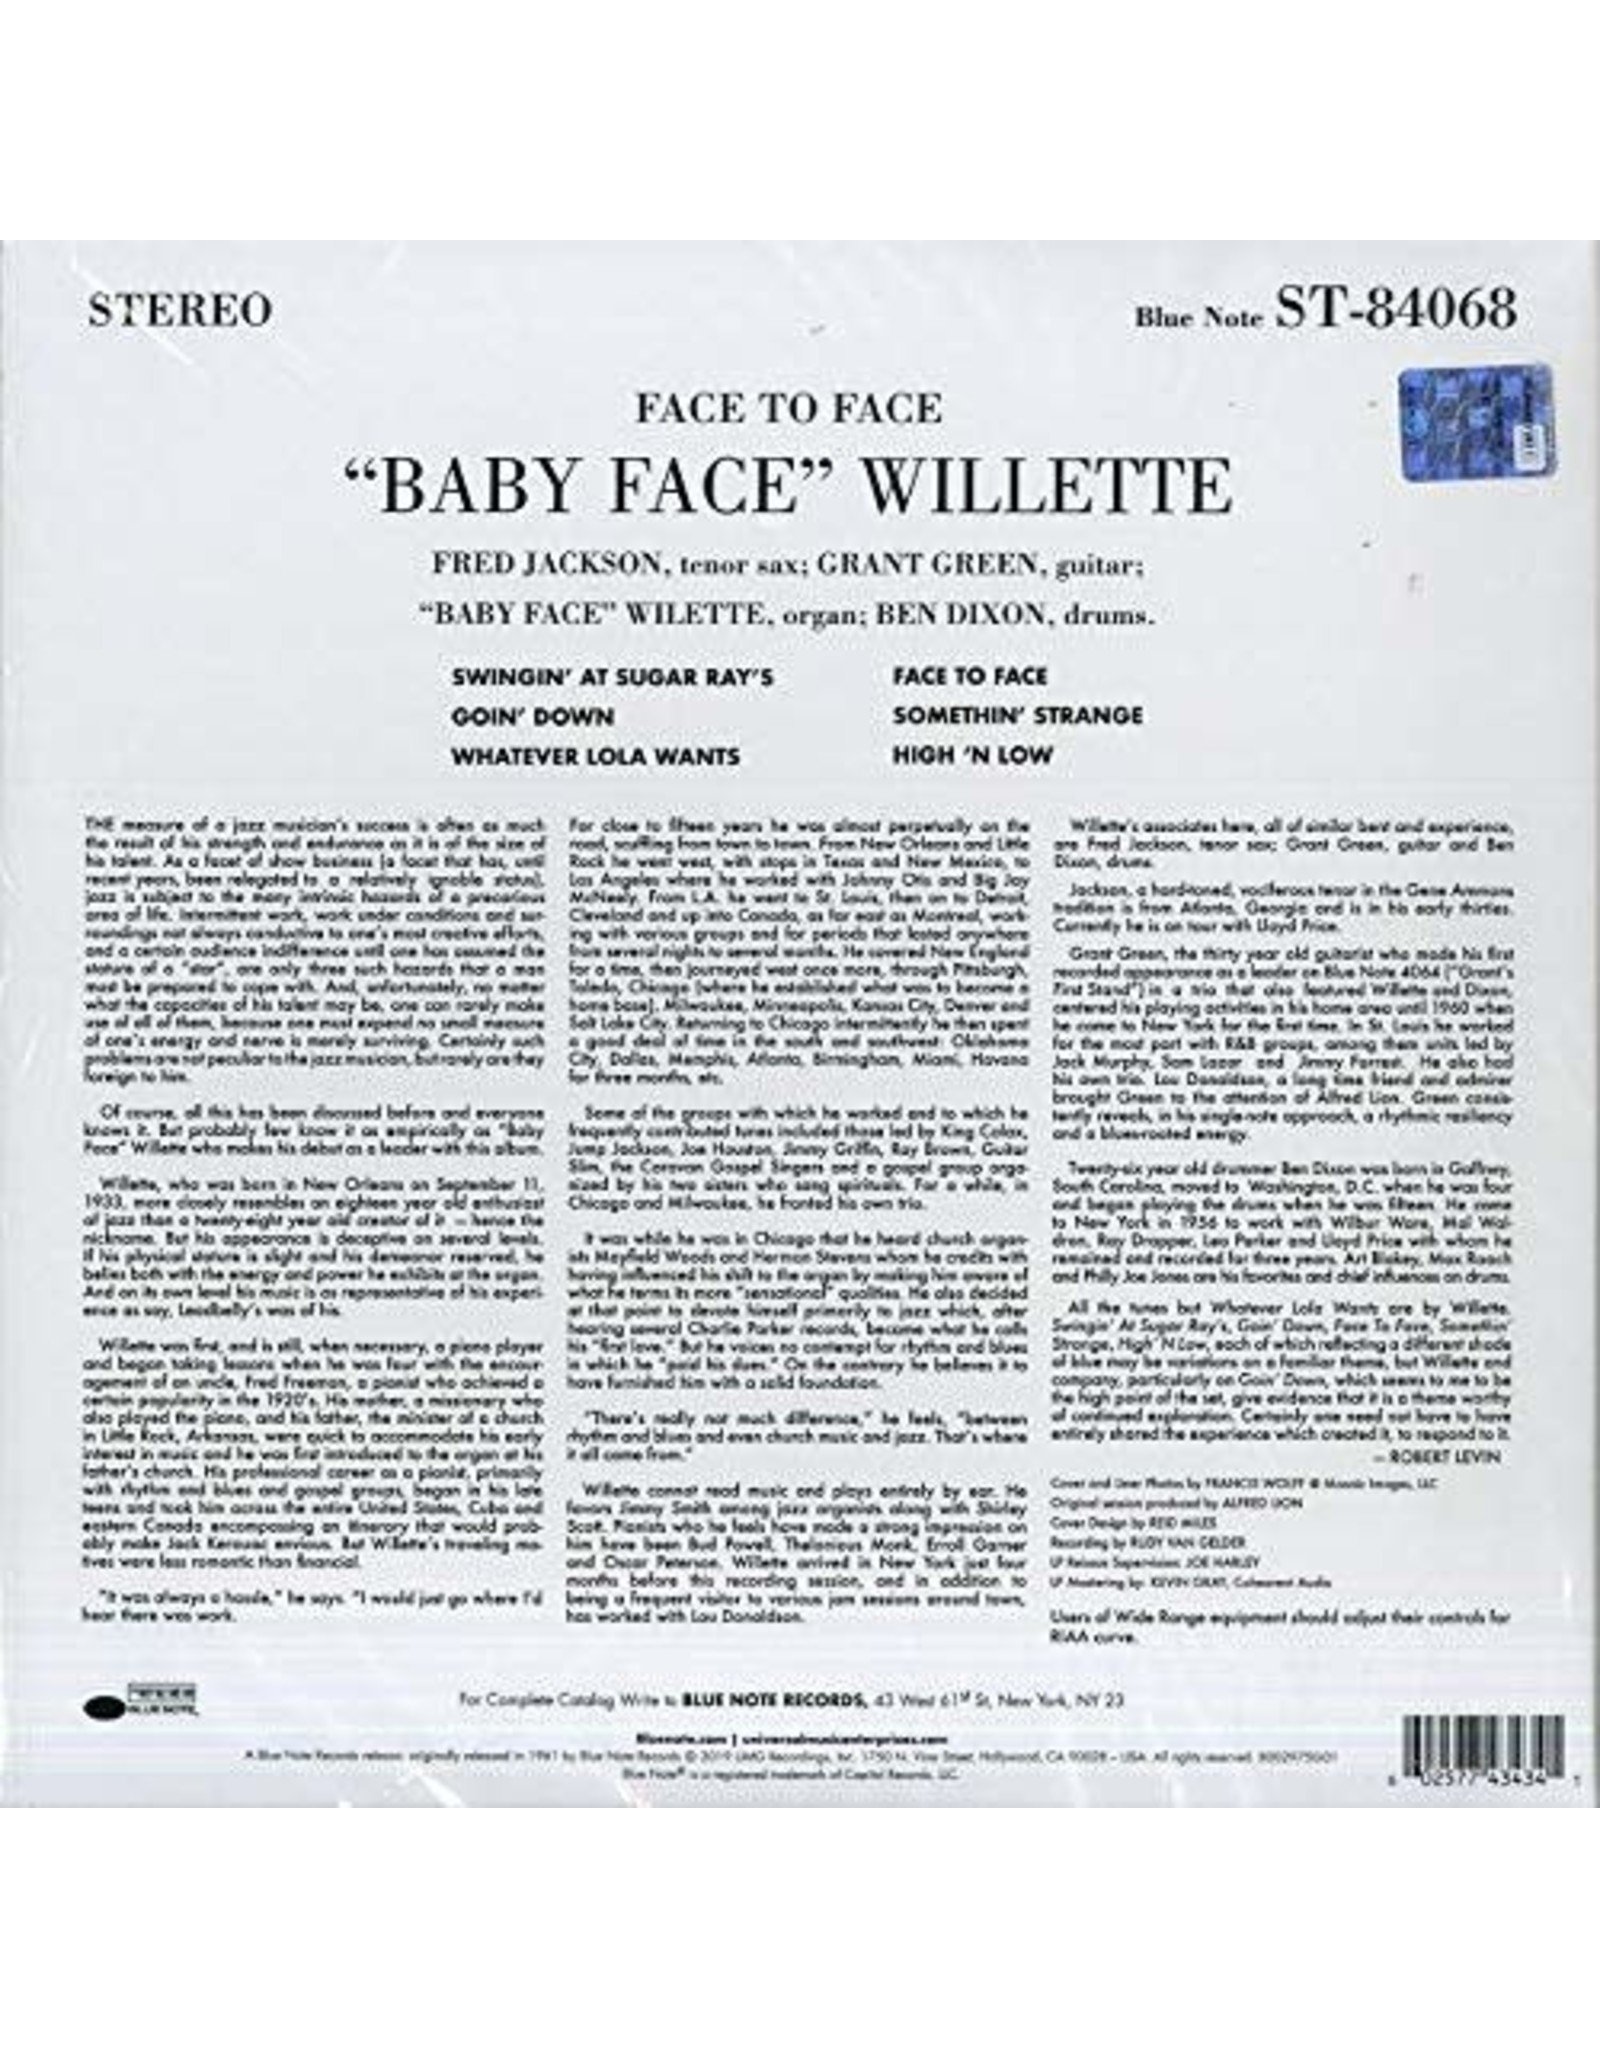 Baby Face Willette - Face To Face (Blue Note Tone Poet)